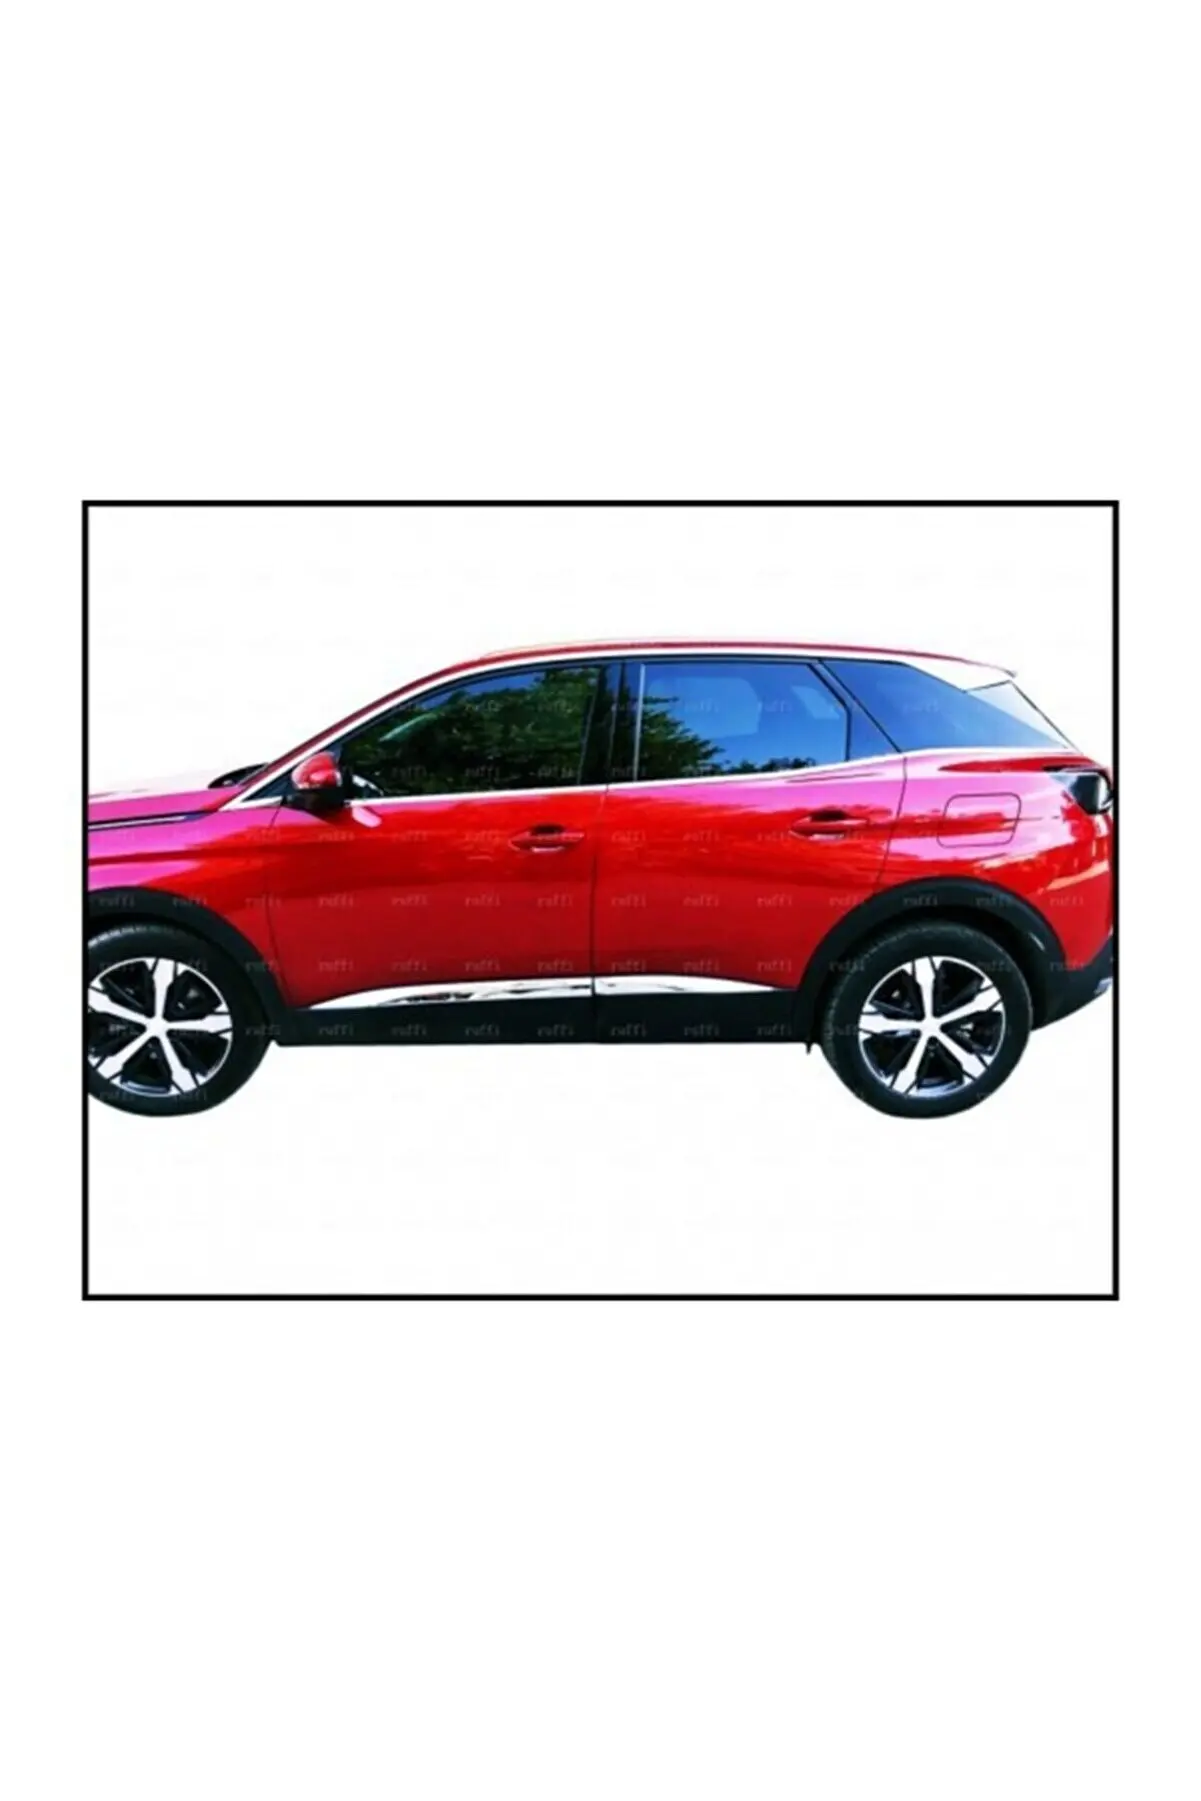 

Peugeot 3008 Chrome Window Trims Middle Strip Frame-Body Kit Auto SUV Car Stainless Steel Accessories Parts Auto Design Tuning